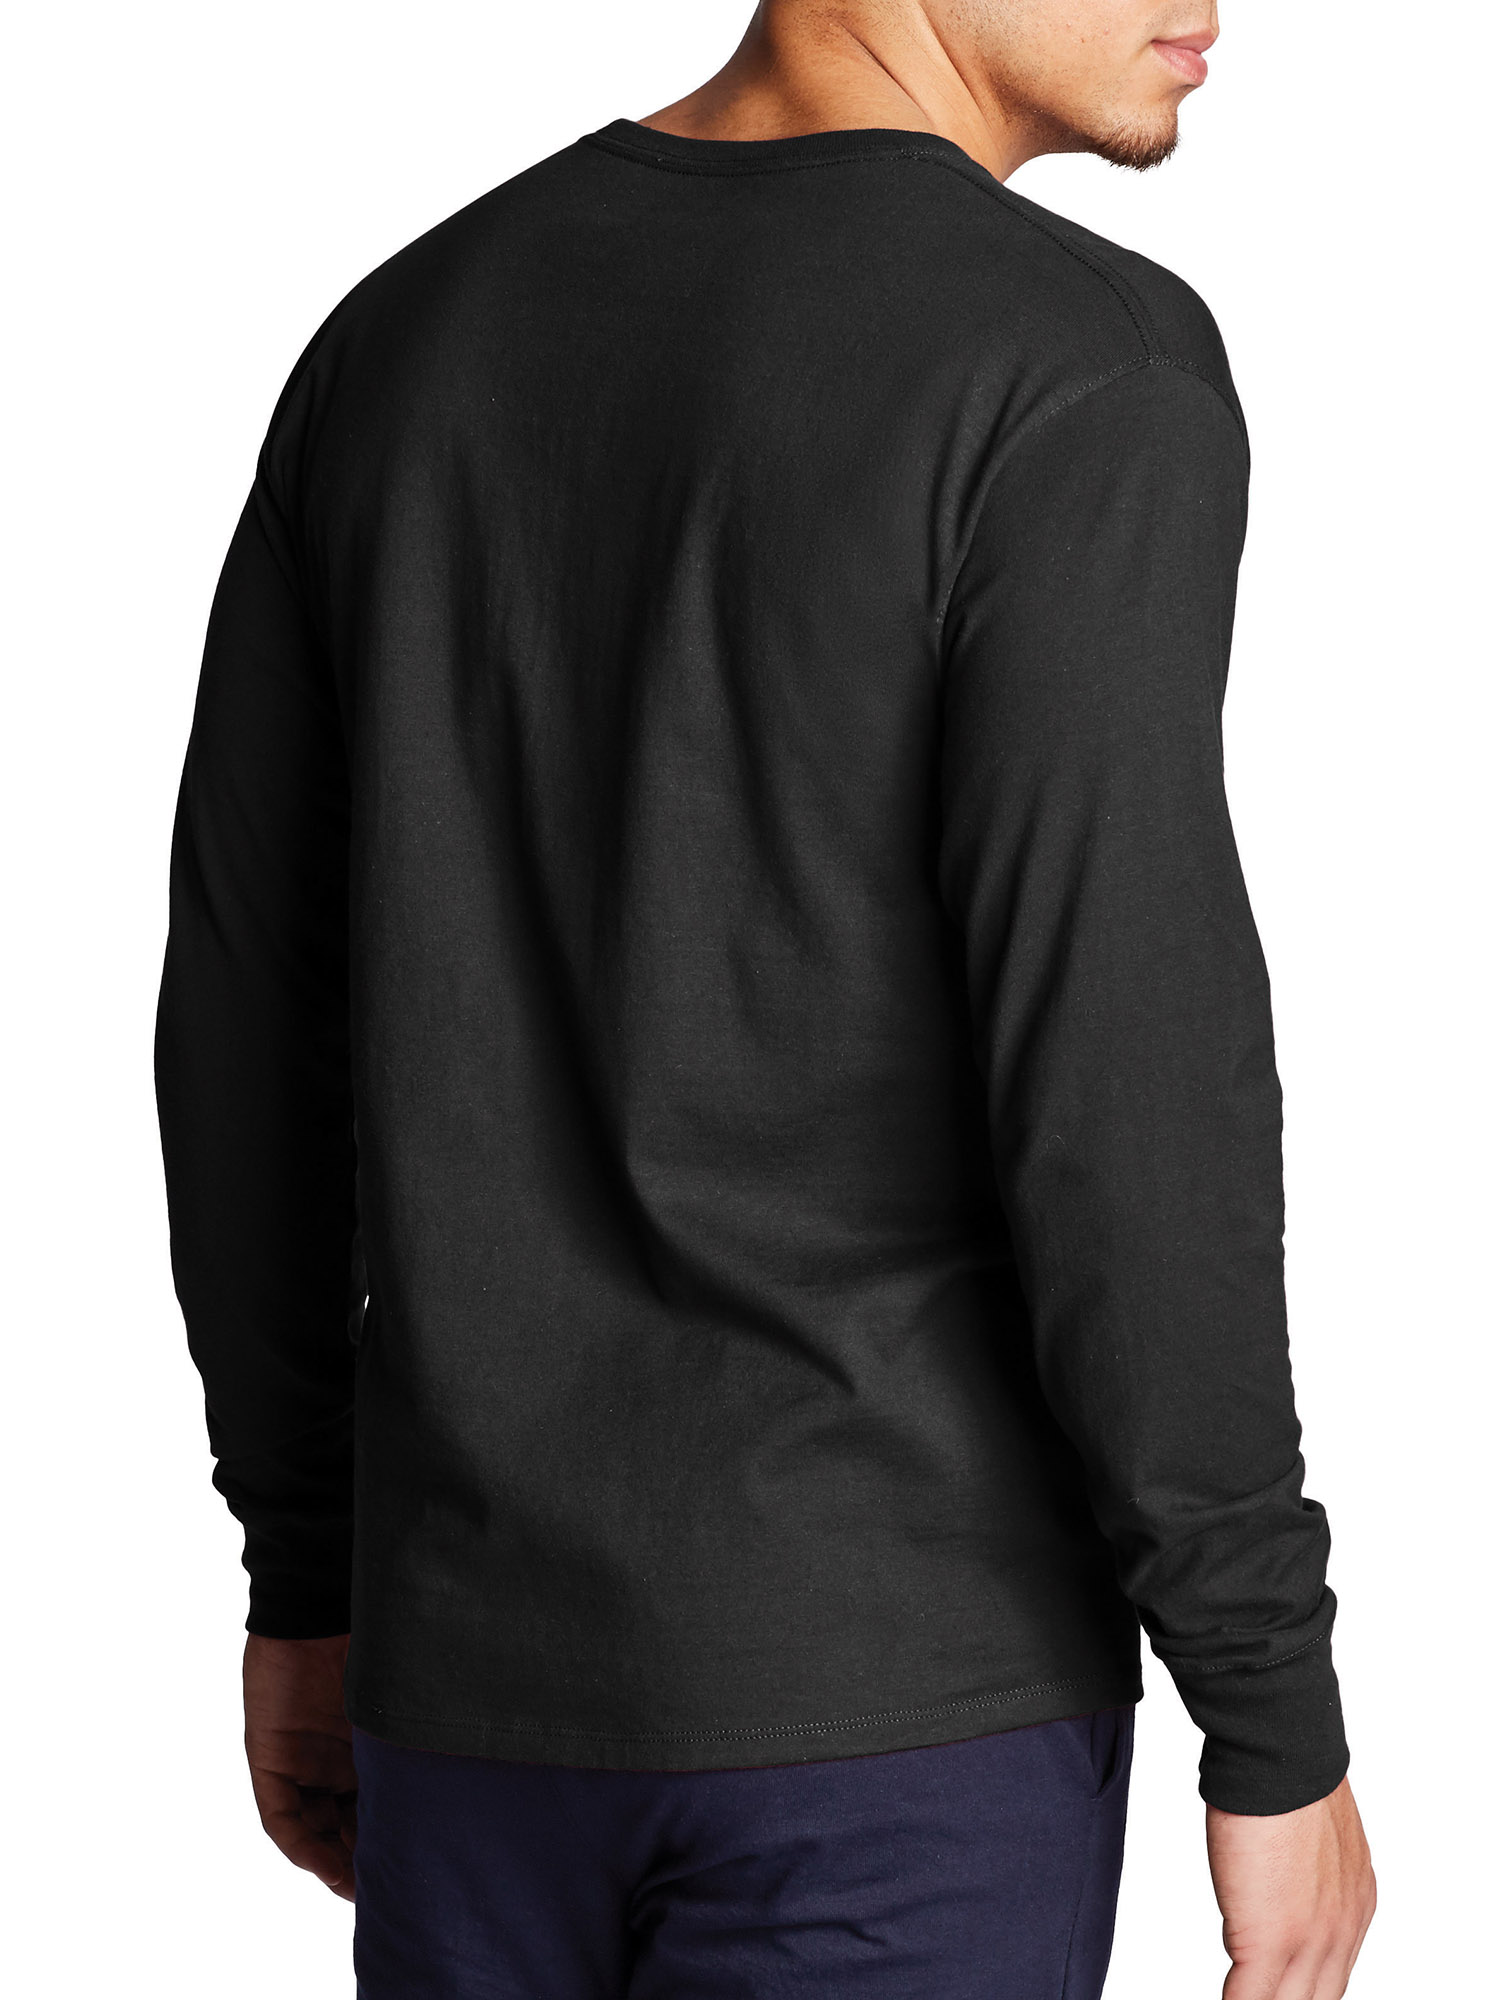 Champion Men's and Big Men's Classic Solid Jersey Long Sleeve T-Shirt, Sizes S-2XL - image 3 of 7